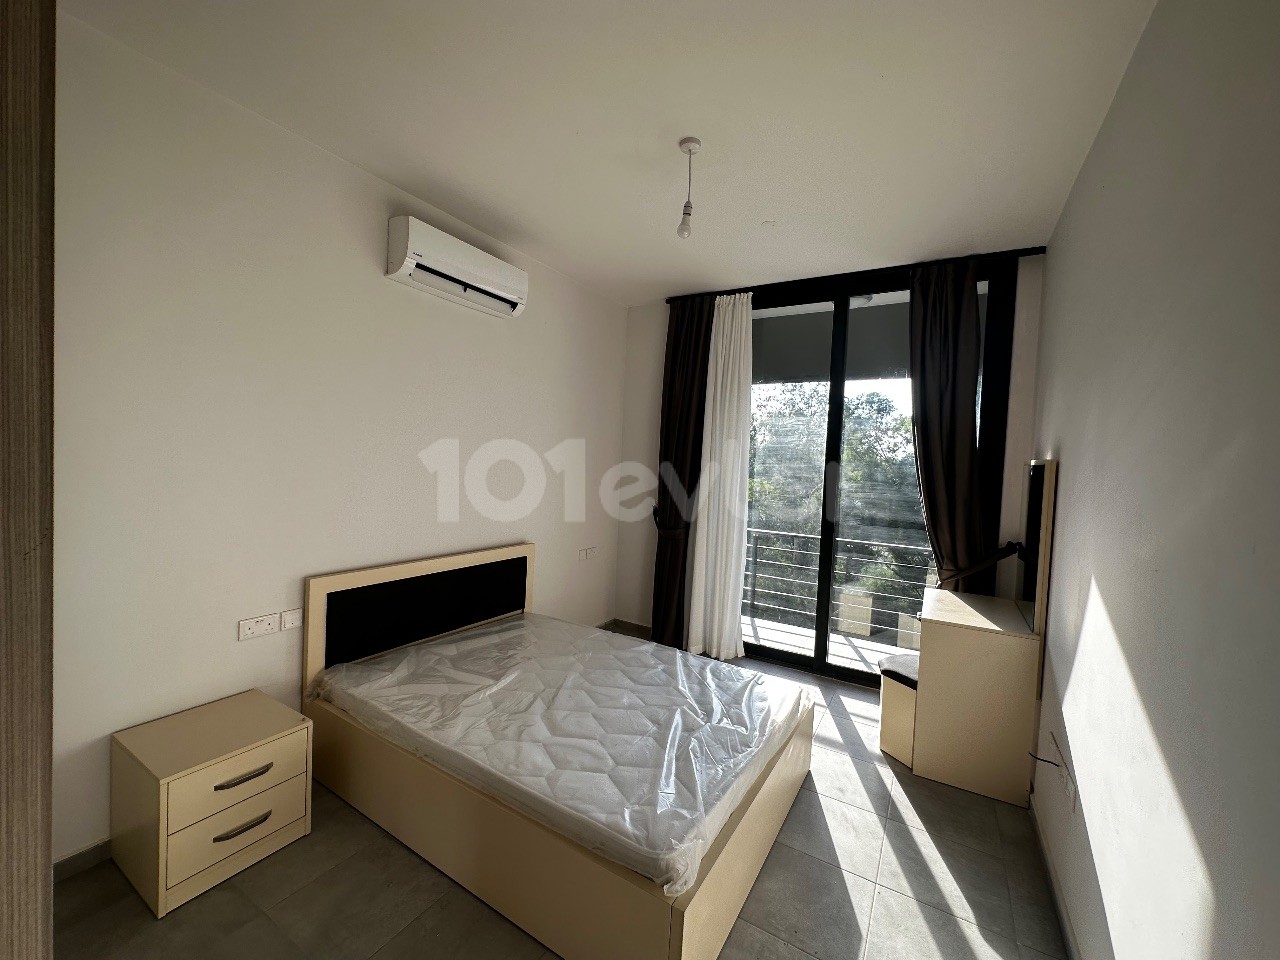 Nicosia; 1 Minute from Paşa Hotel, Newly Furnished, Balcony, MONTHLY PAYMENT!!! Apartment